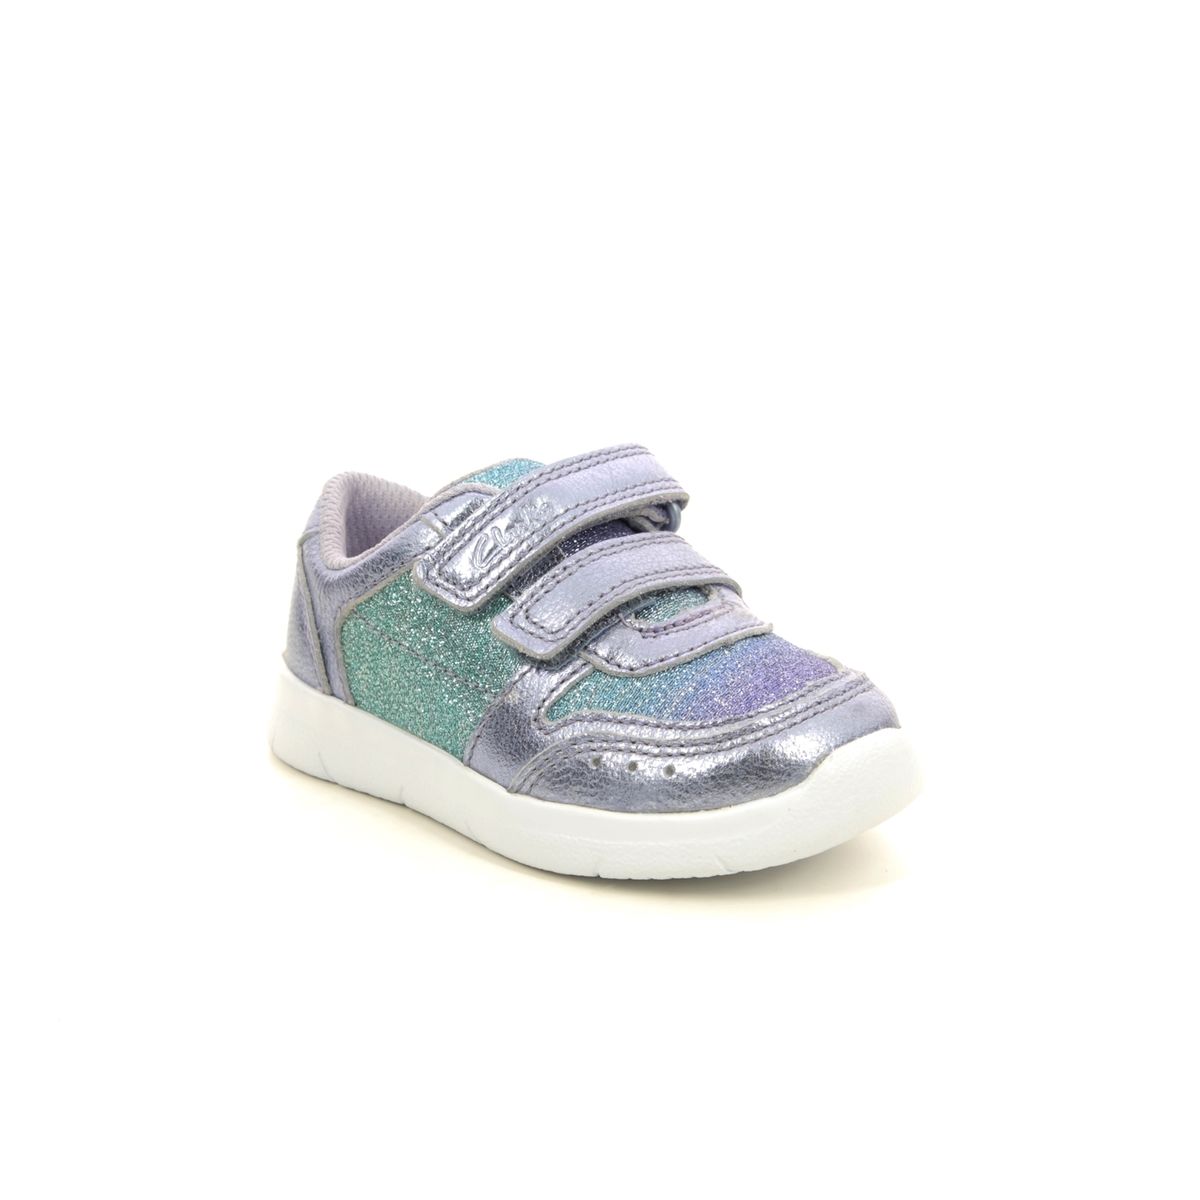 Clarks Ath Sonar T Lilac Kids Toddler Girls Trainers 541217G In Size 5 In Plain Lilac G Width Fitting